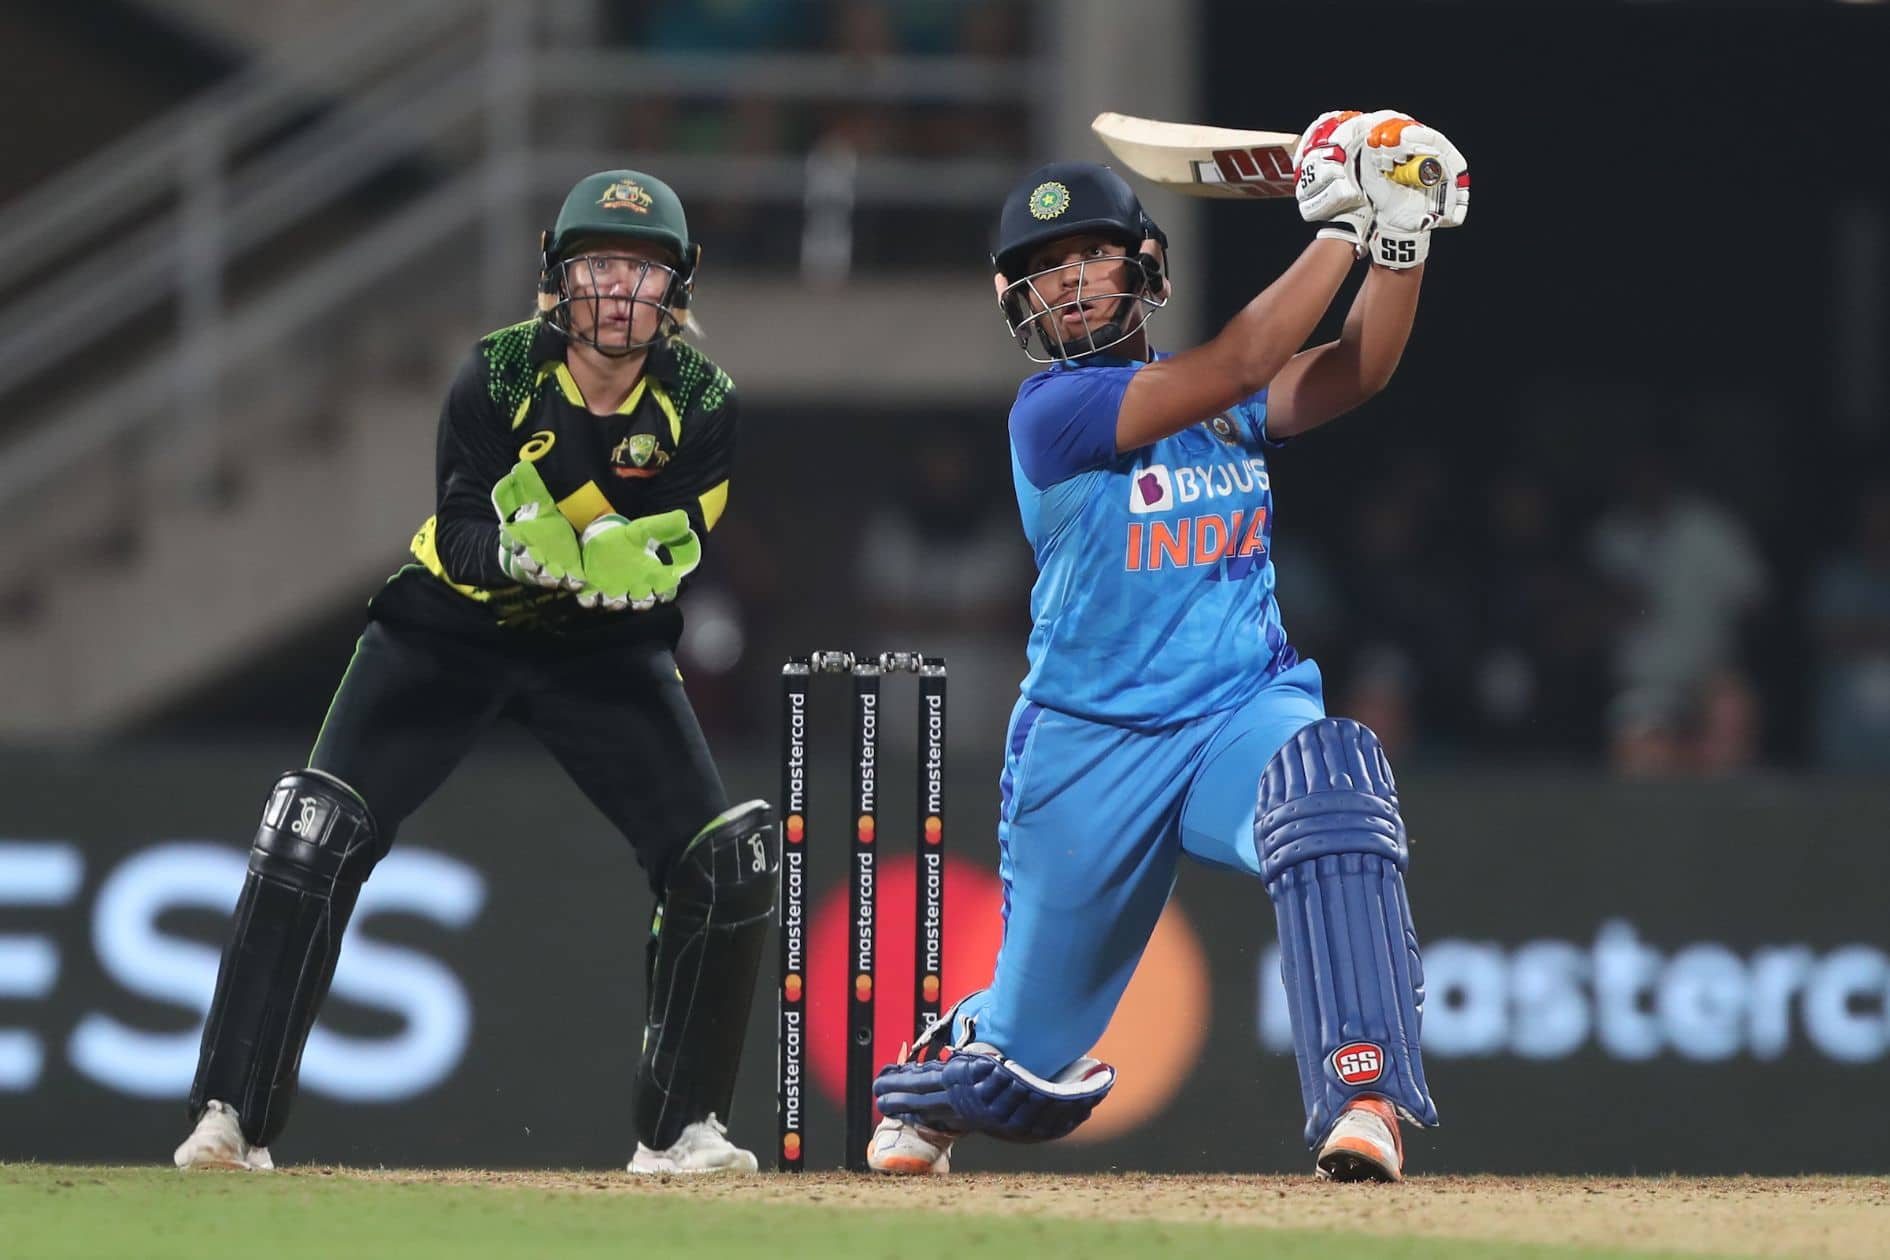 India's rising star gets 'HUGE' applaud from Jhulan Goswami